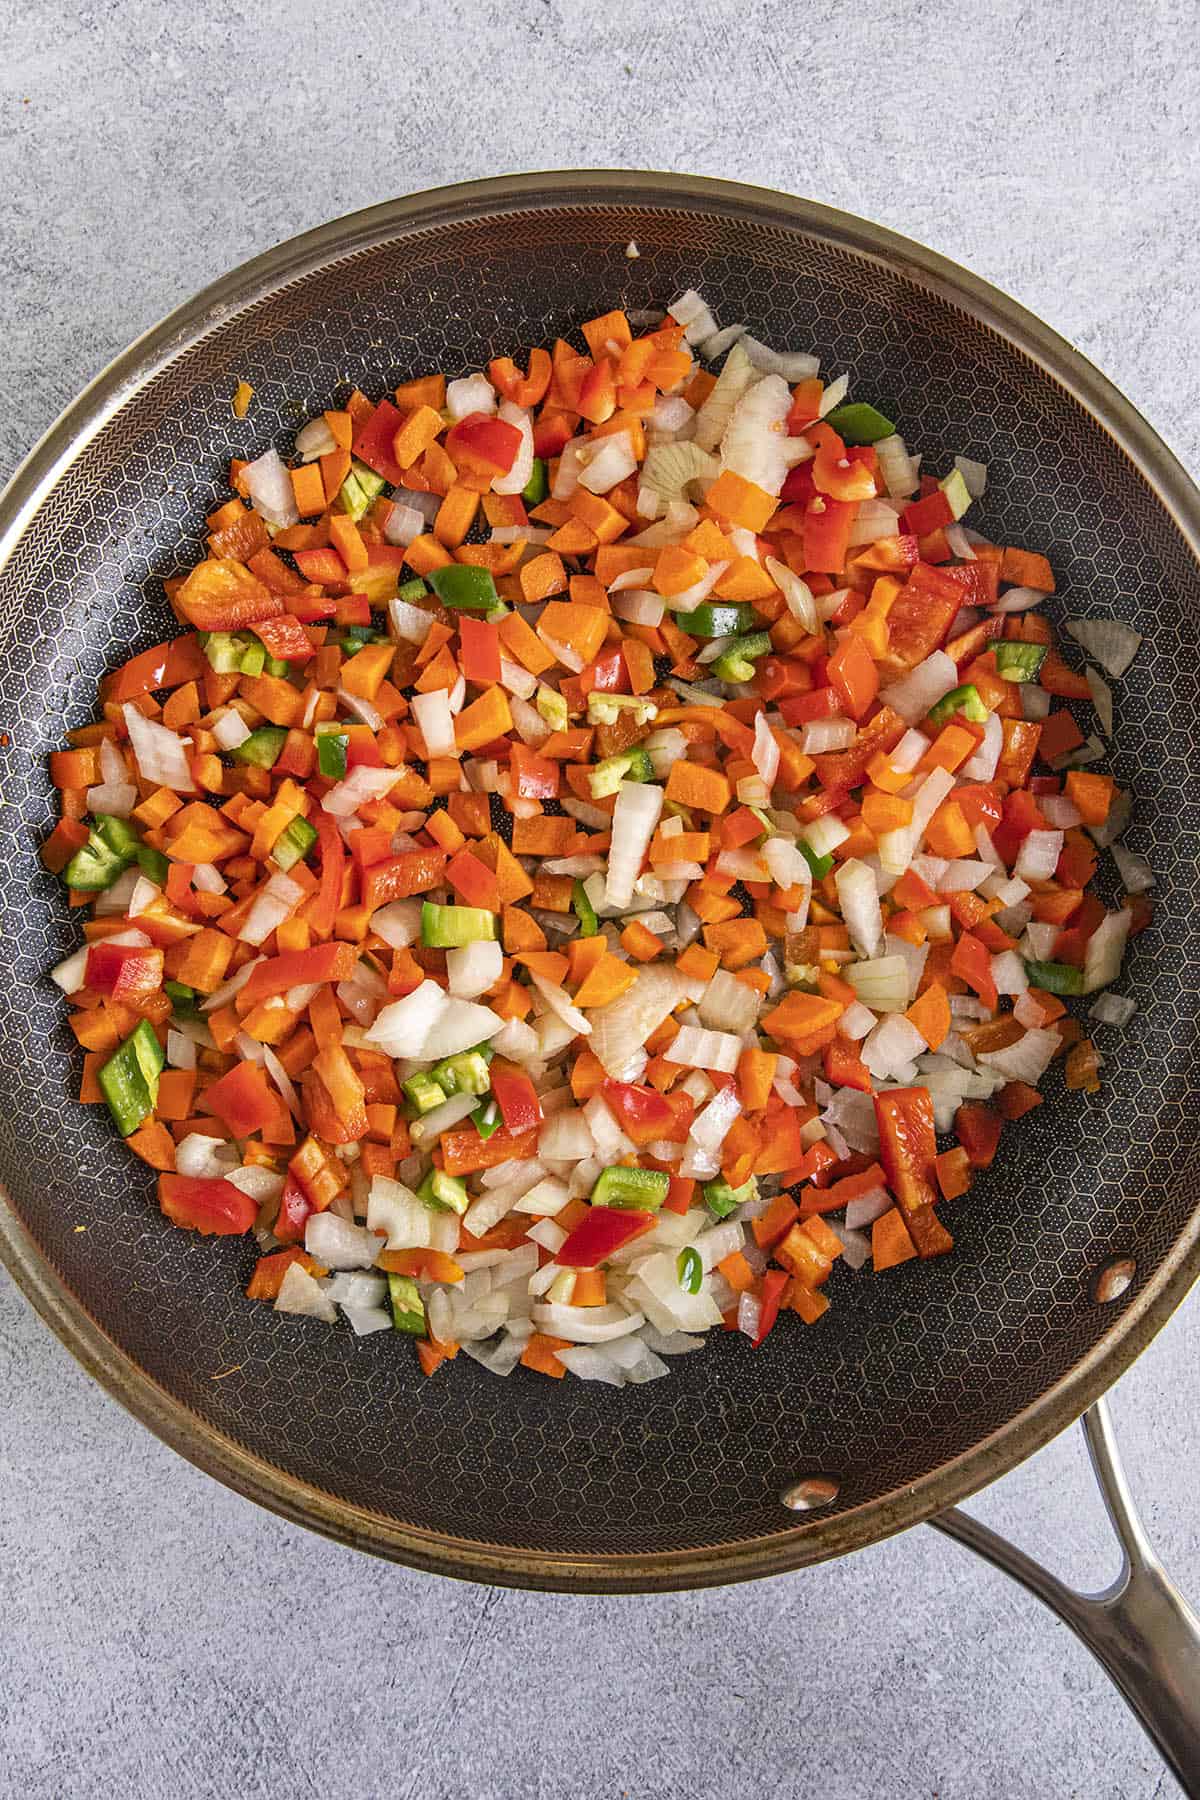 Cooking vegetables in a pan to make Curried Rice